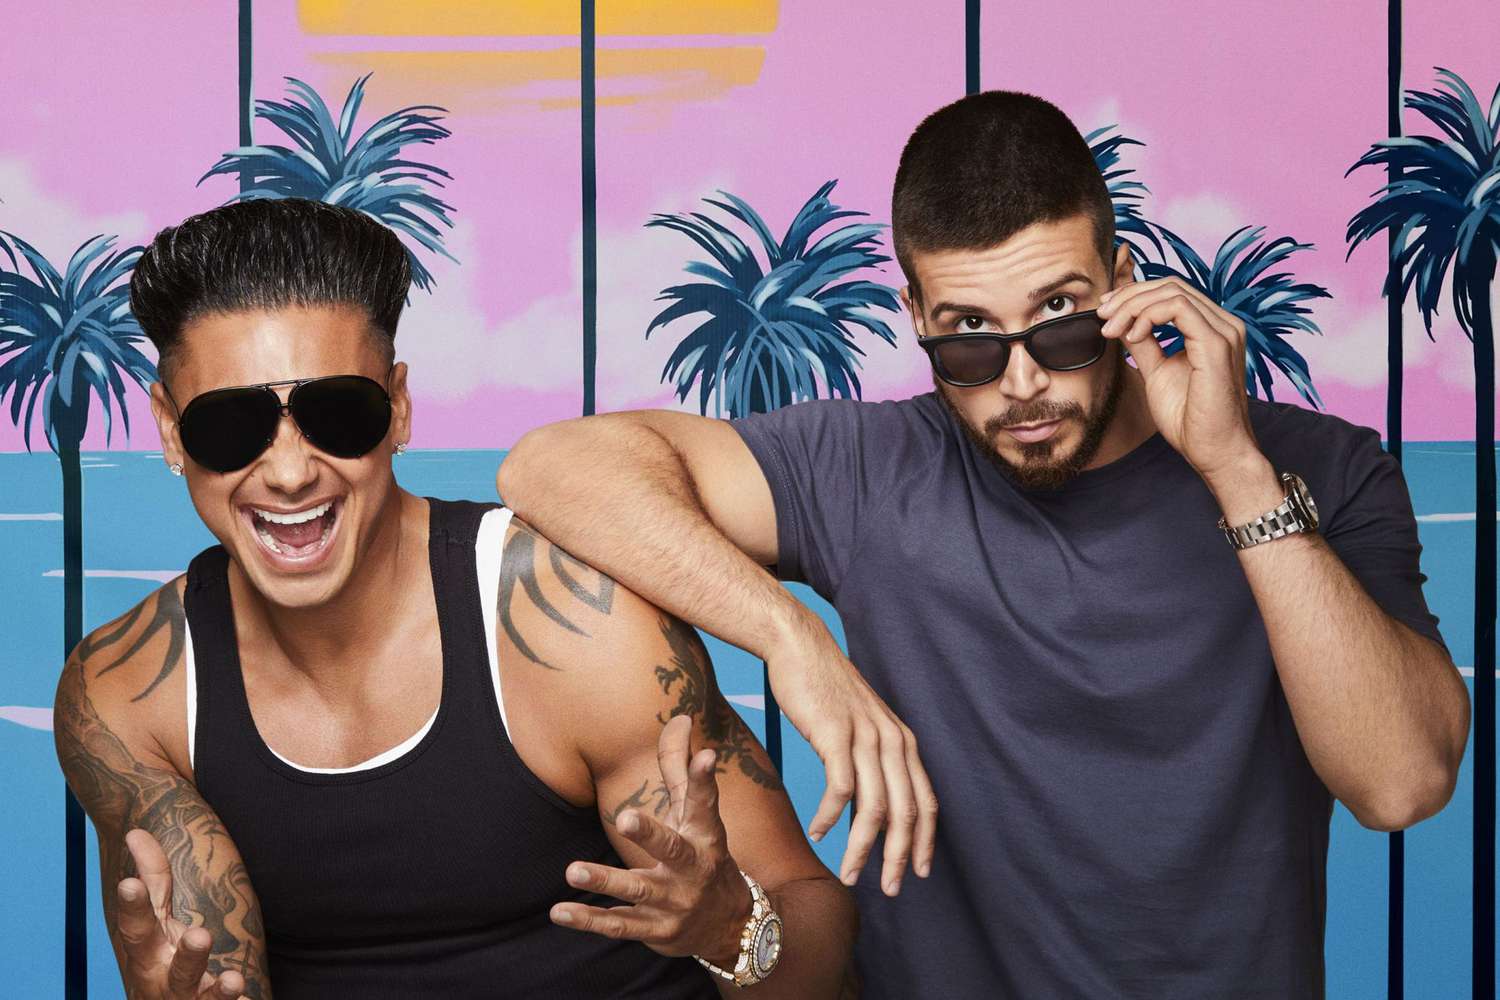 Jersey Shore stars Pauly D and Vinny 